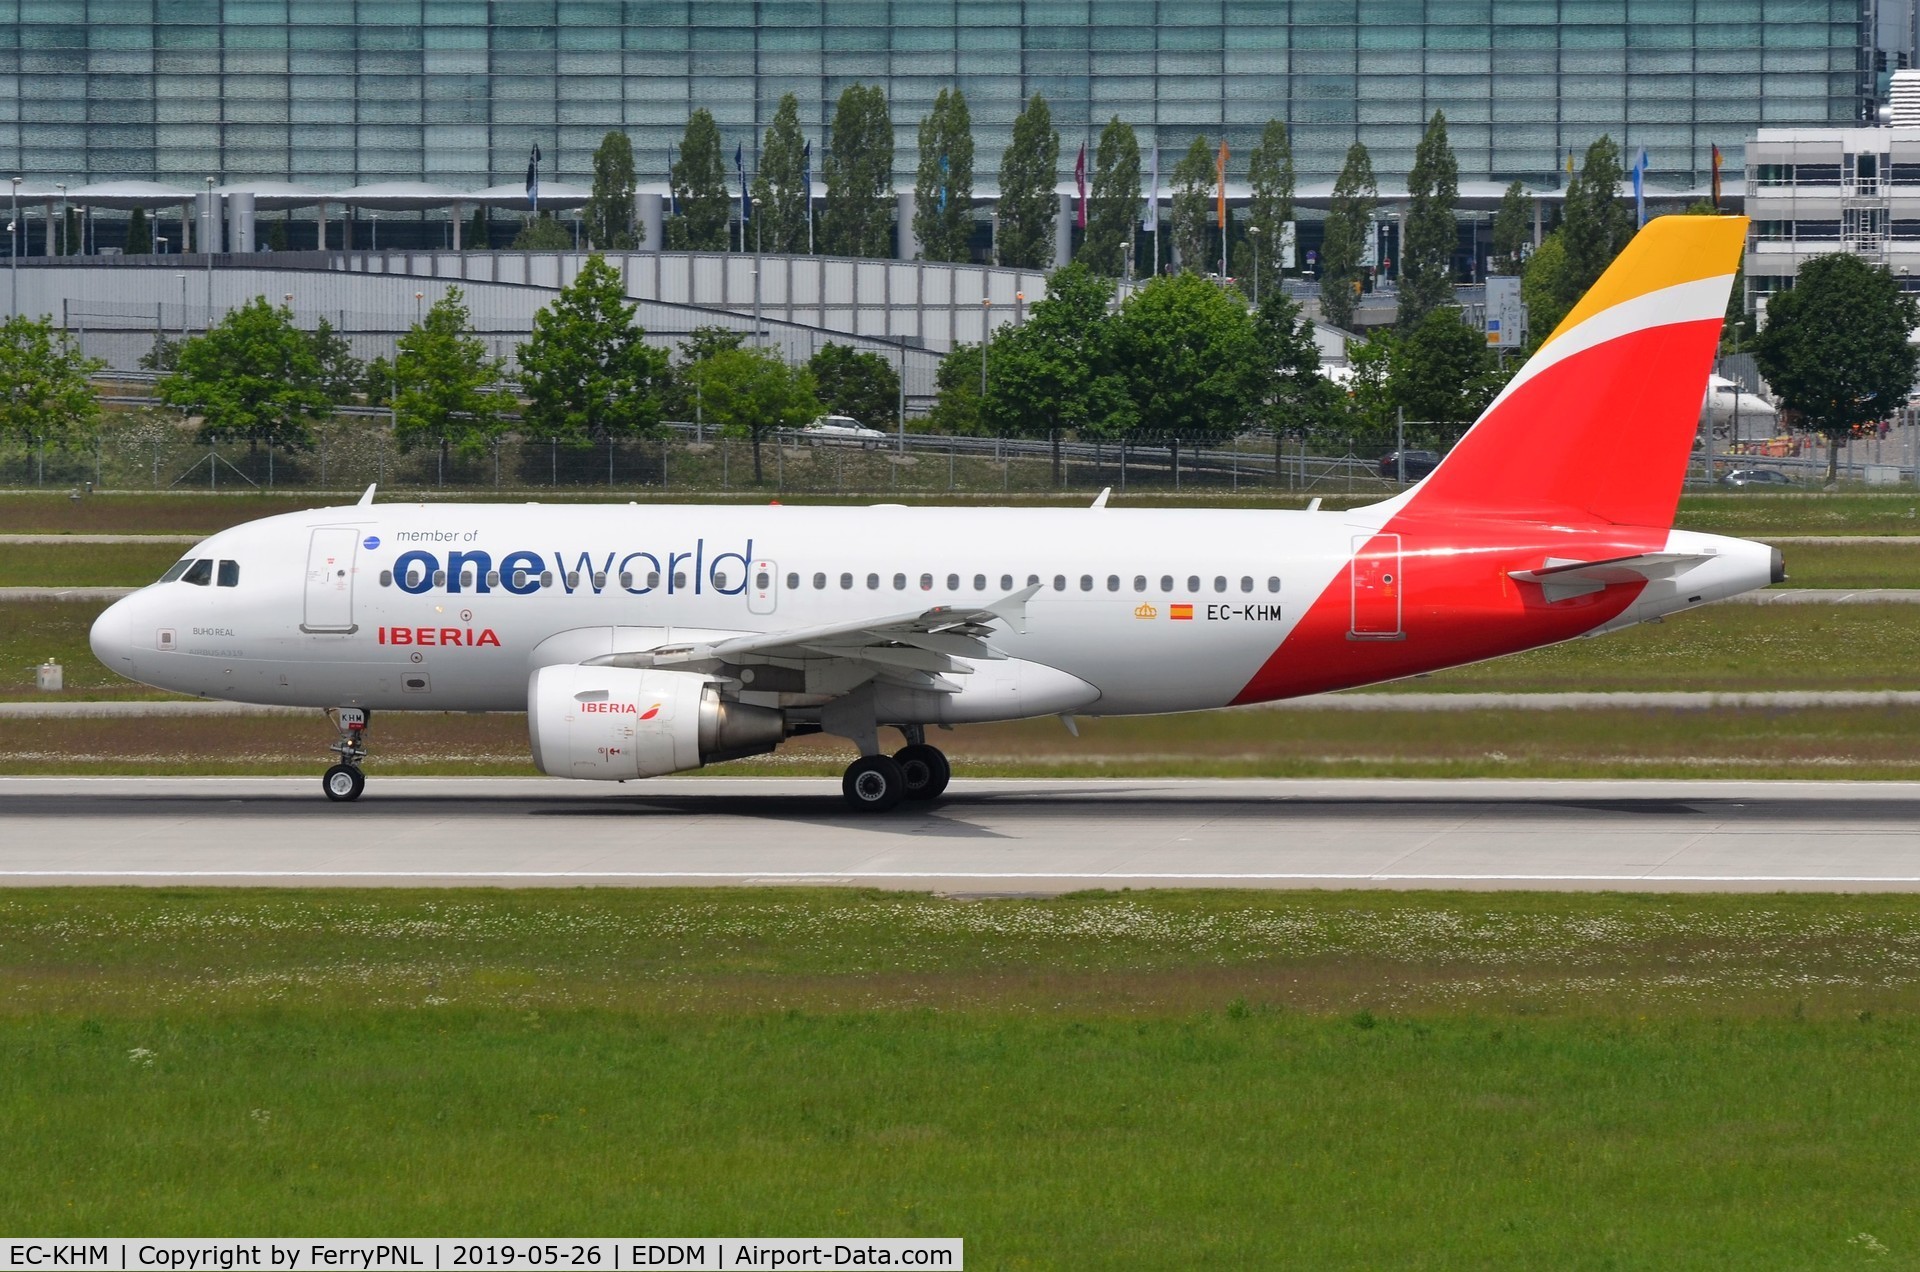 EC-KHM, 2007 Airbus A319-111 C/N 3209, Iberia A319 with One World tittles.